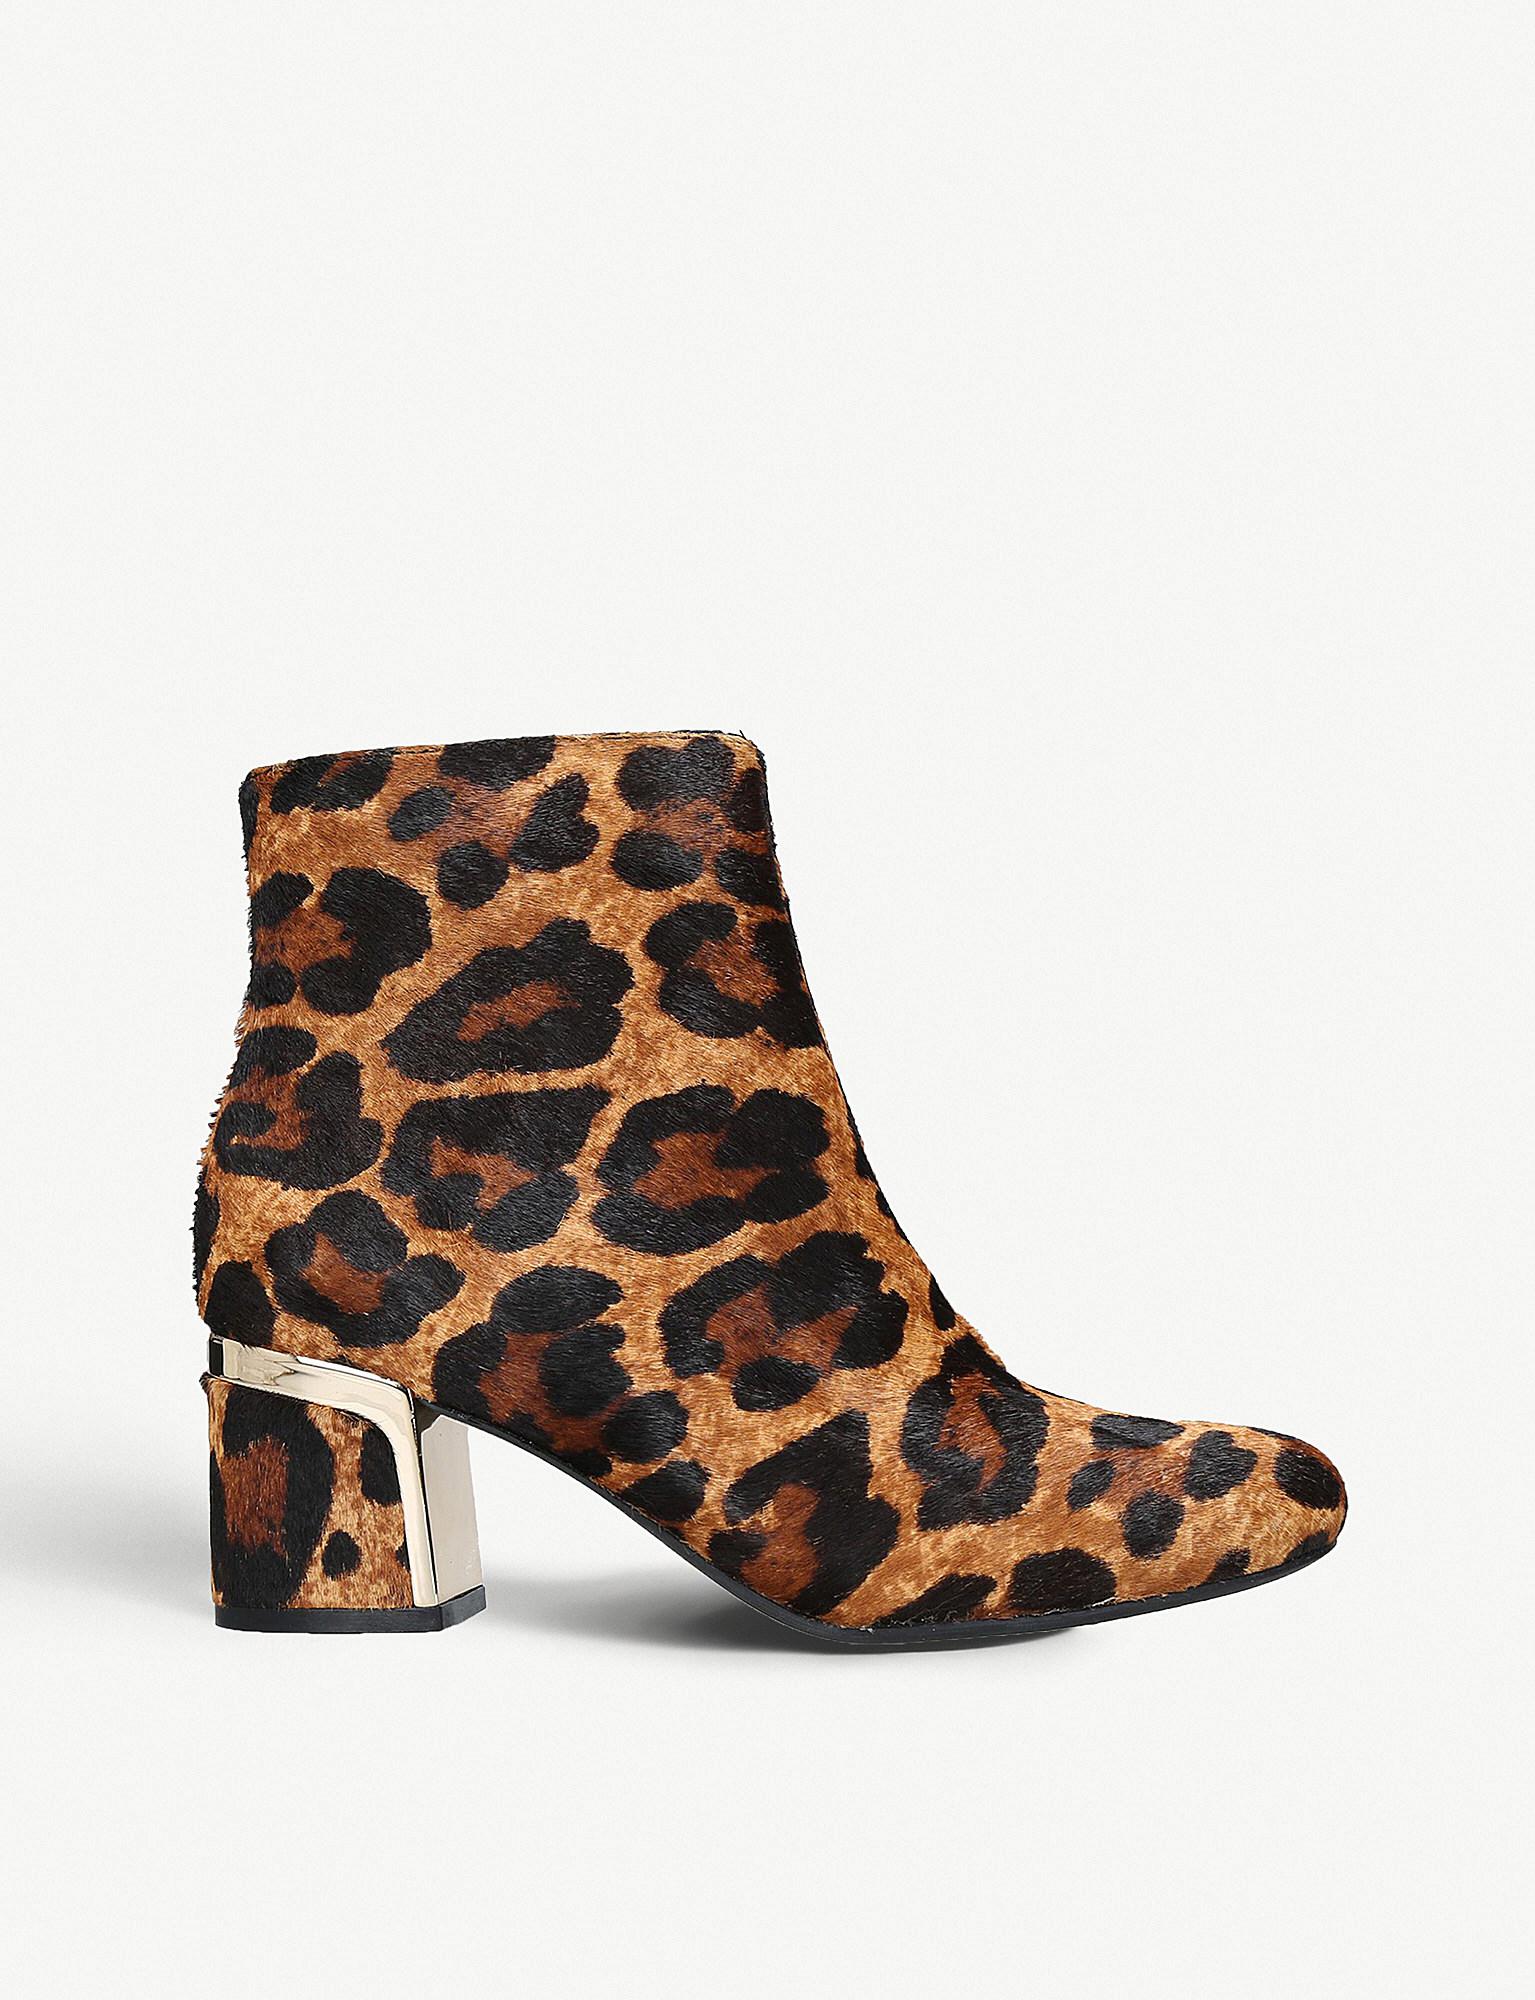 DKNY Rubber Corrie Ponyhair Leopard-print Ankle Boots in Brown - Lyst